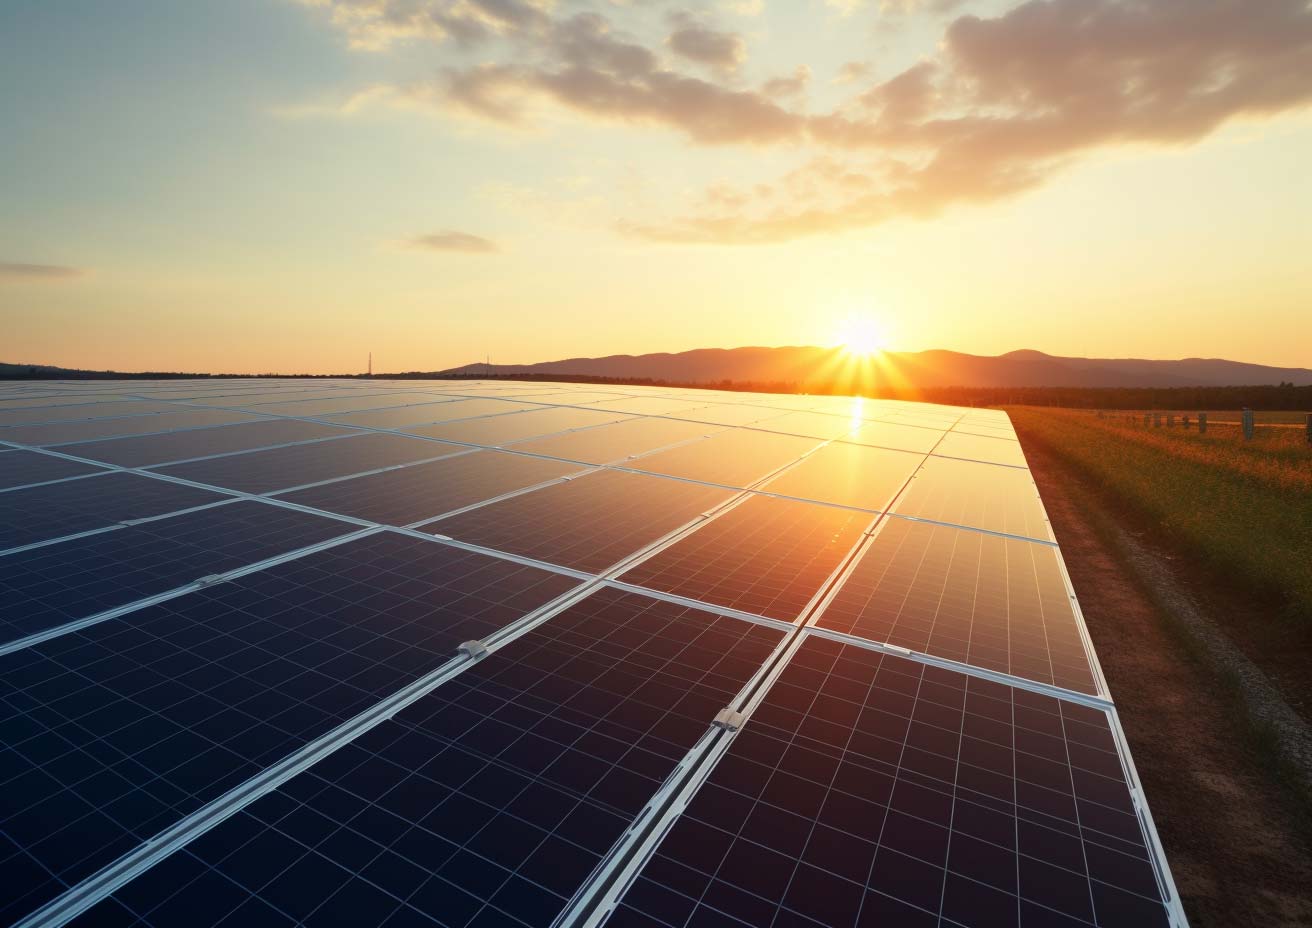 The sun is setting over a solar panel field, highlighting the advantages of solar energy.